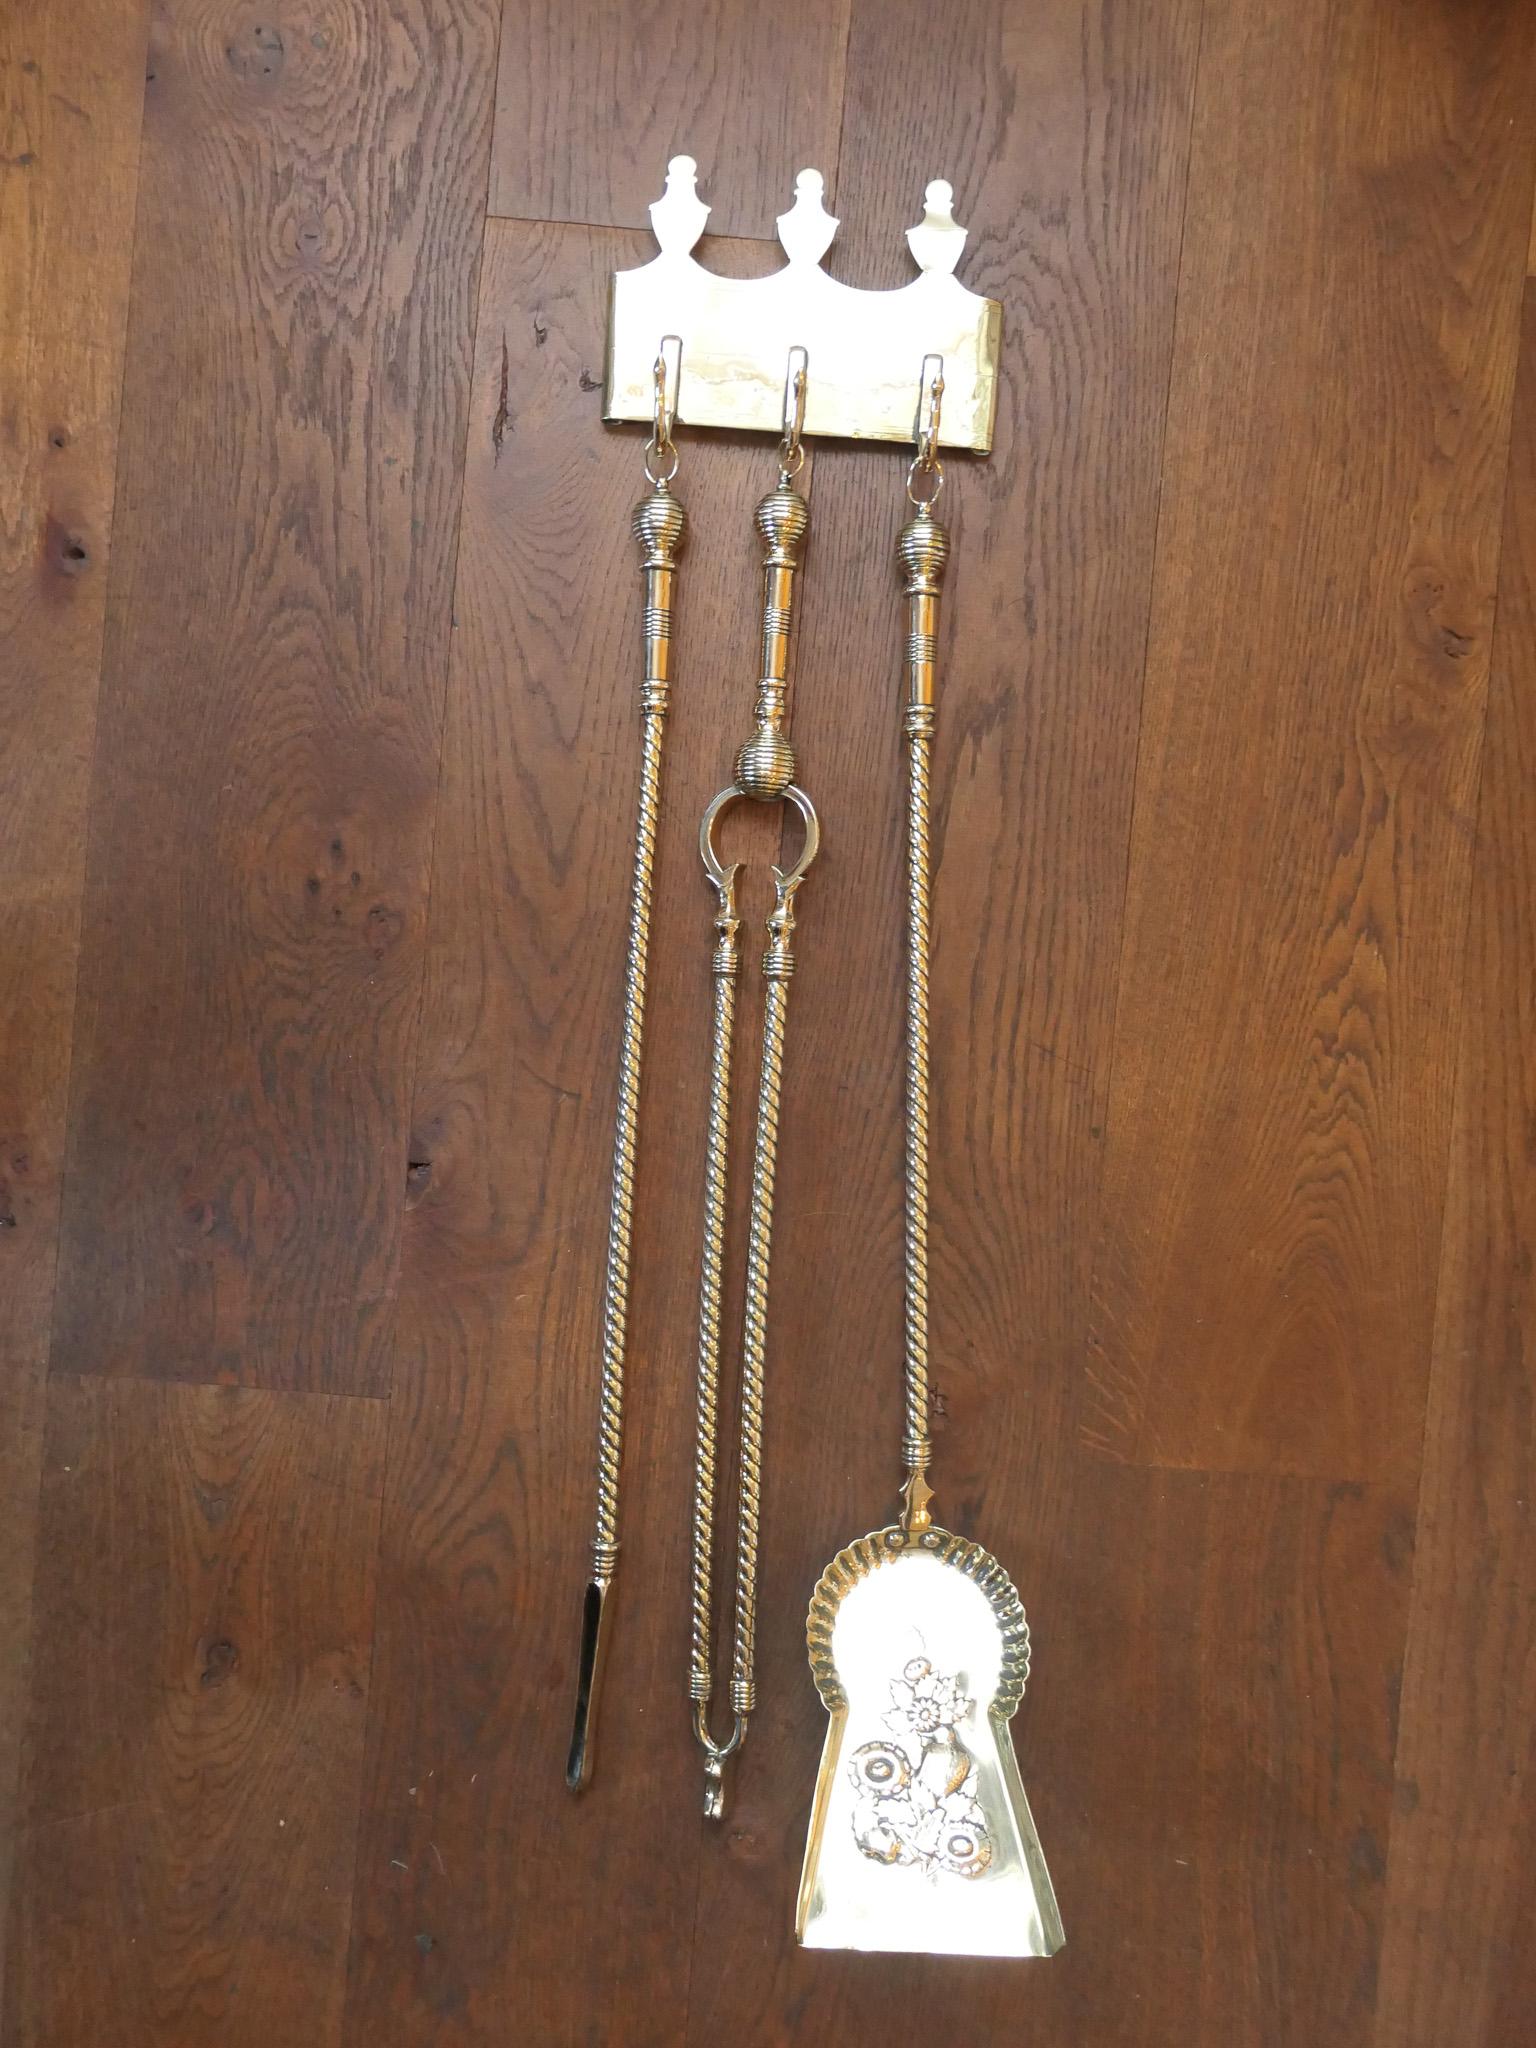 19th century Dutch victorian fireplace tool set consisting of a fireplace tongs, fire poker, a fireplace shovel and a hanger. The set is made of polished brass. They are in a good condition and are fully functional.